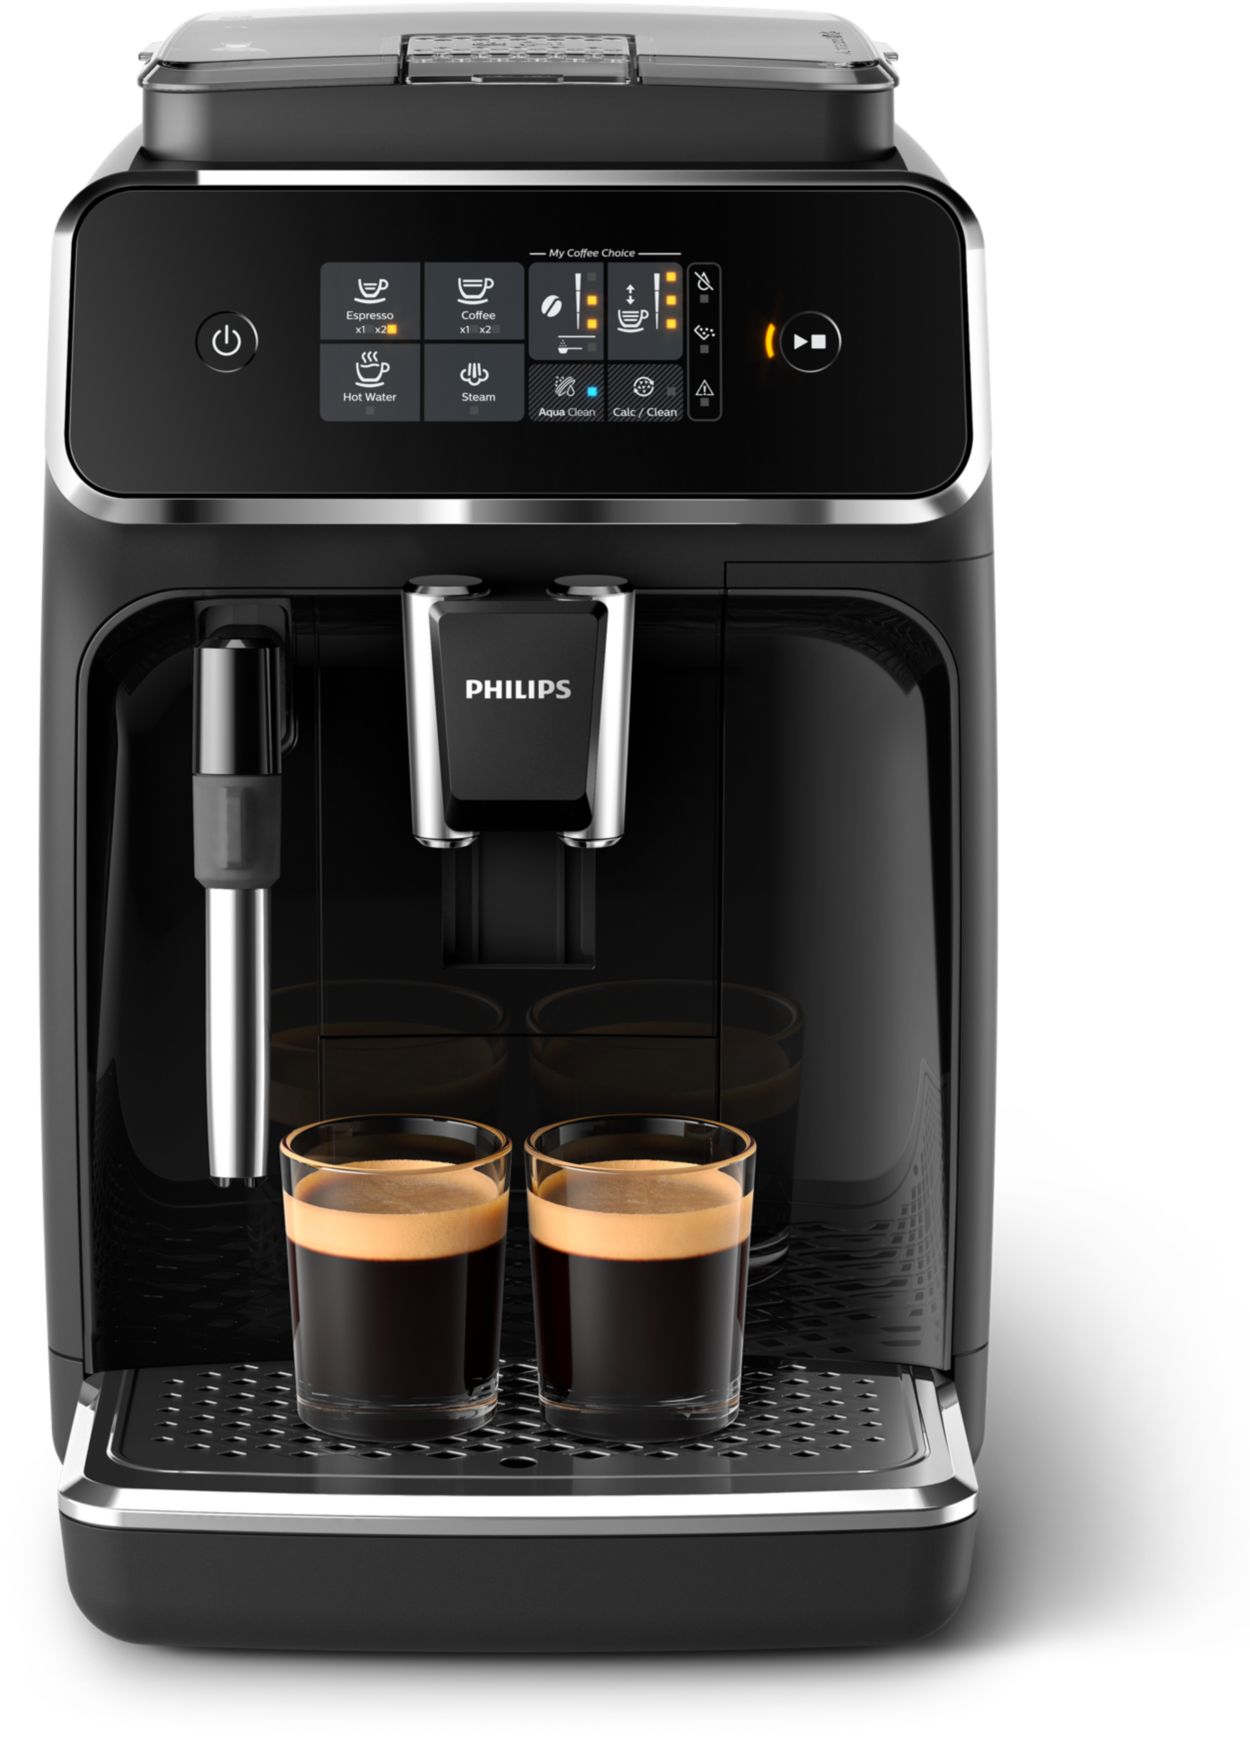 MACHINE A EXPRESSO FULL AUTOMATIQUE PHILIPS 2200 SERIES EP2221/40